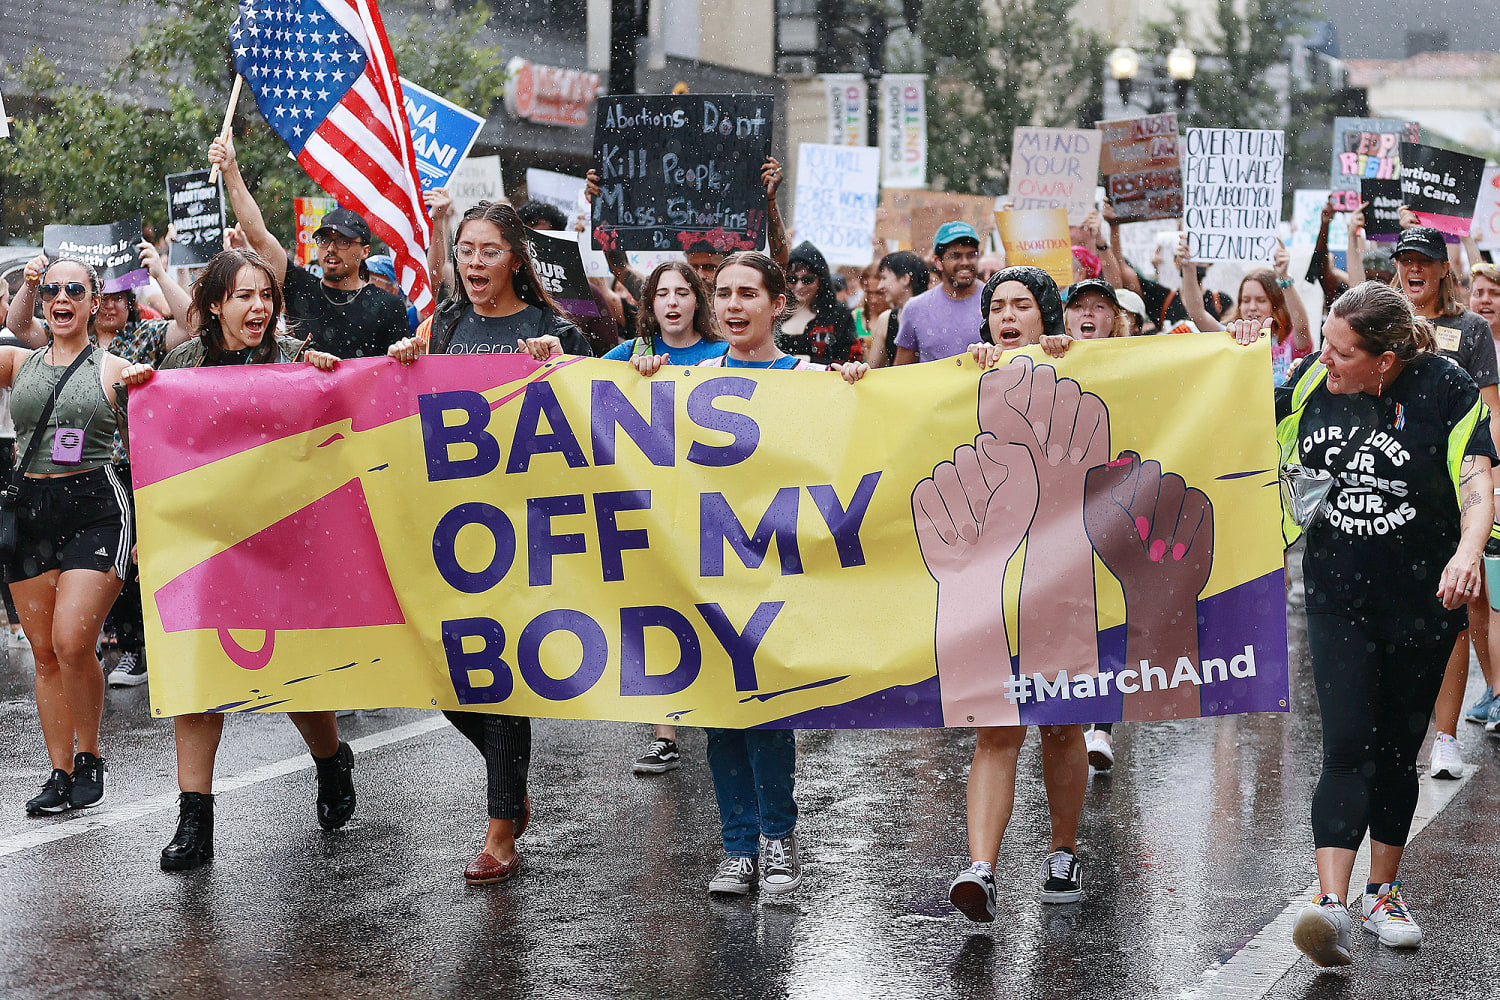 Florida's 6-week abortion takes effect, cutting off access in much of the South